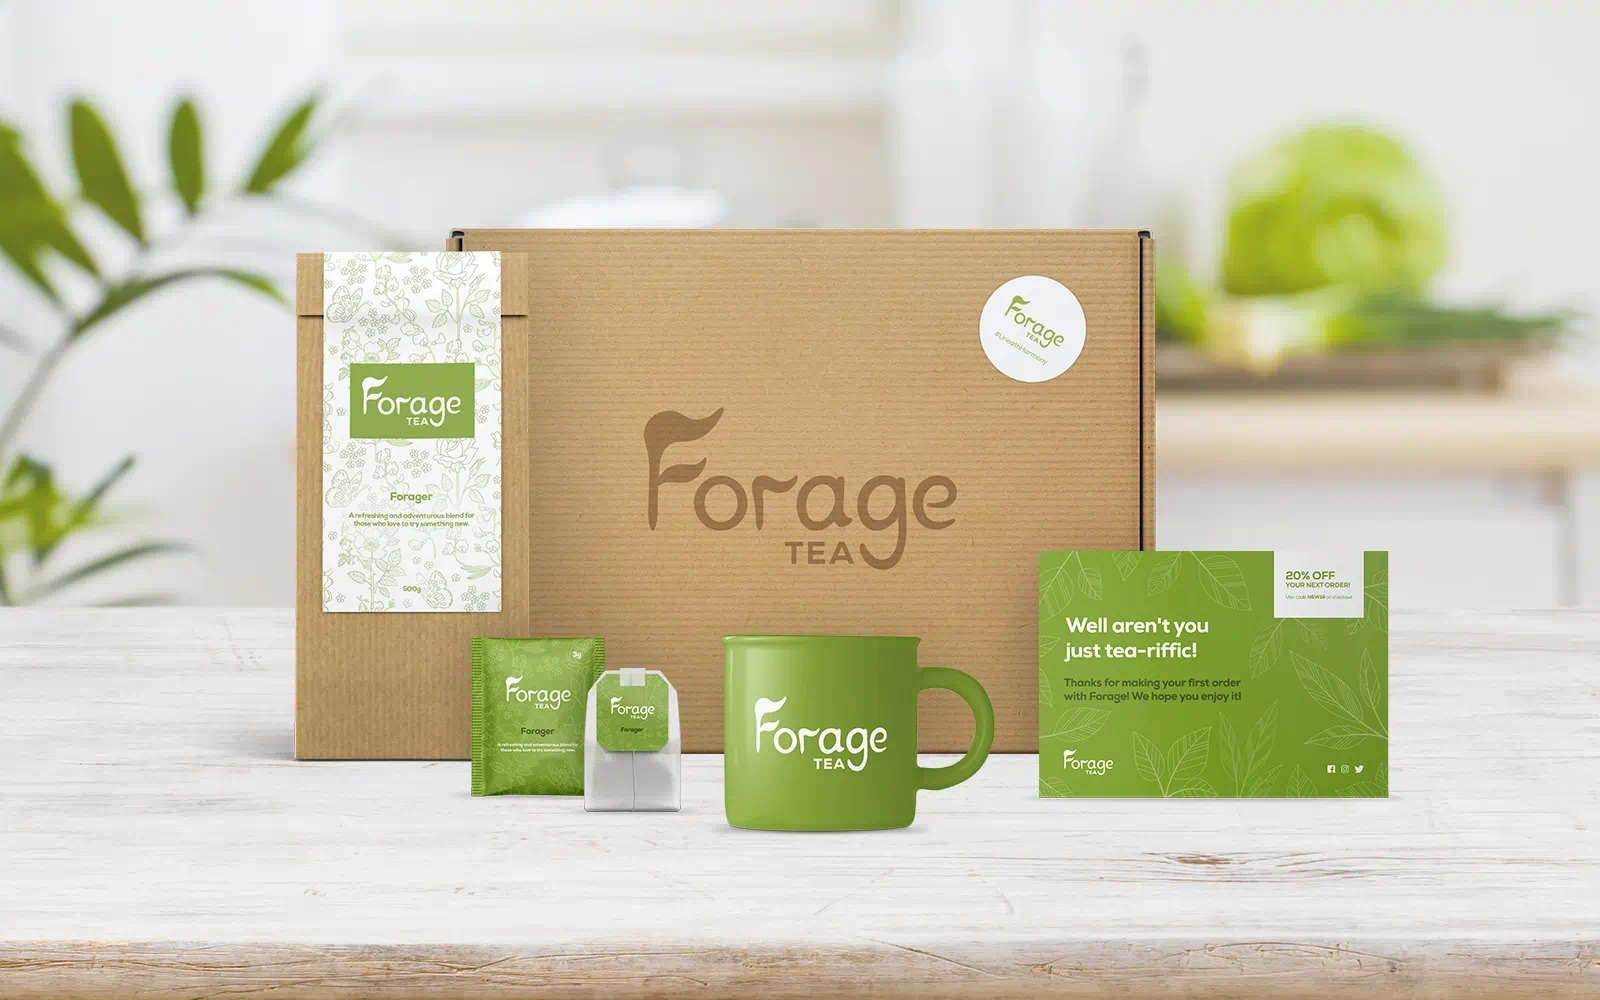 Packaging mockups with the Forage Tea branding including the outer box, inner packet, tea bag sachet and tea bag as well as a branded mug and discount card displayed in a well lit, white, modern kitchen